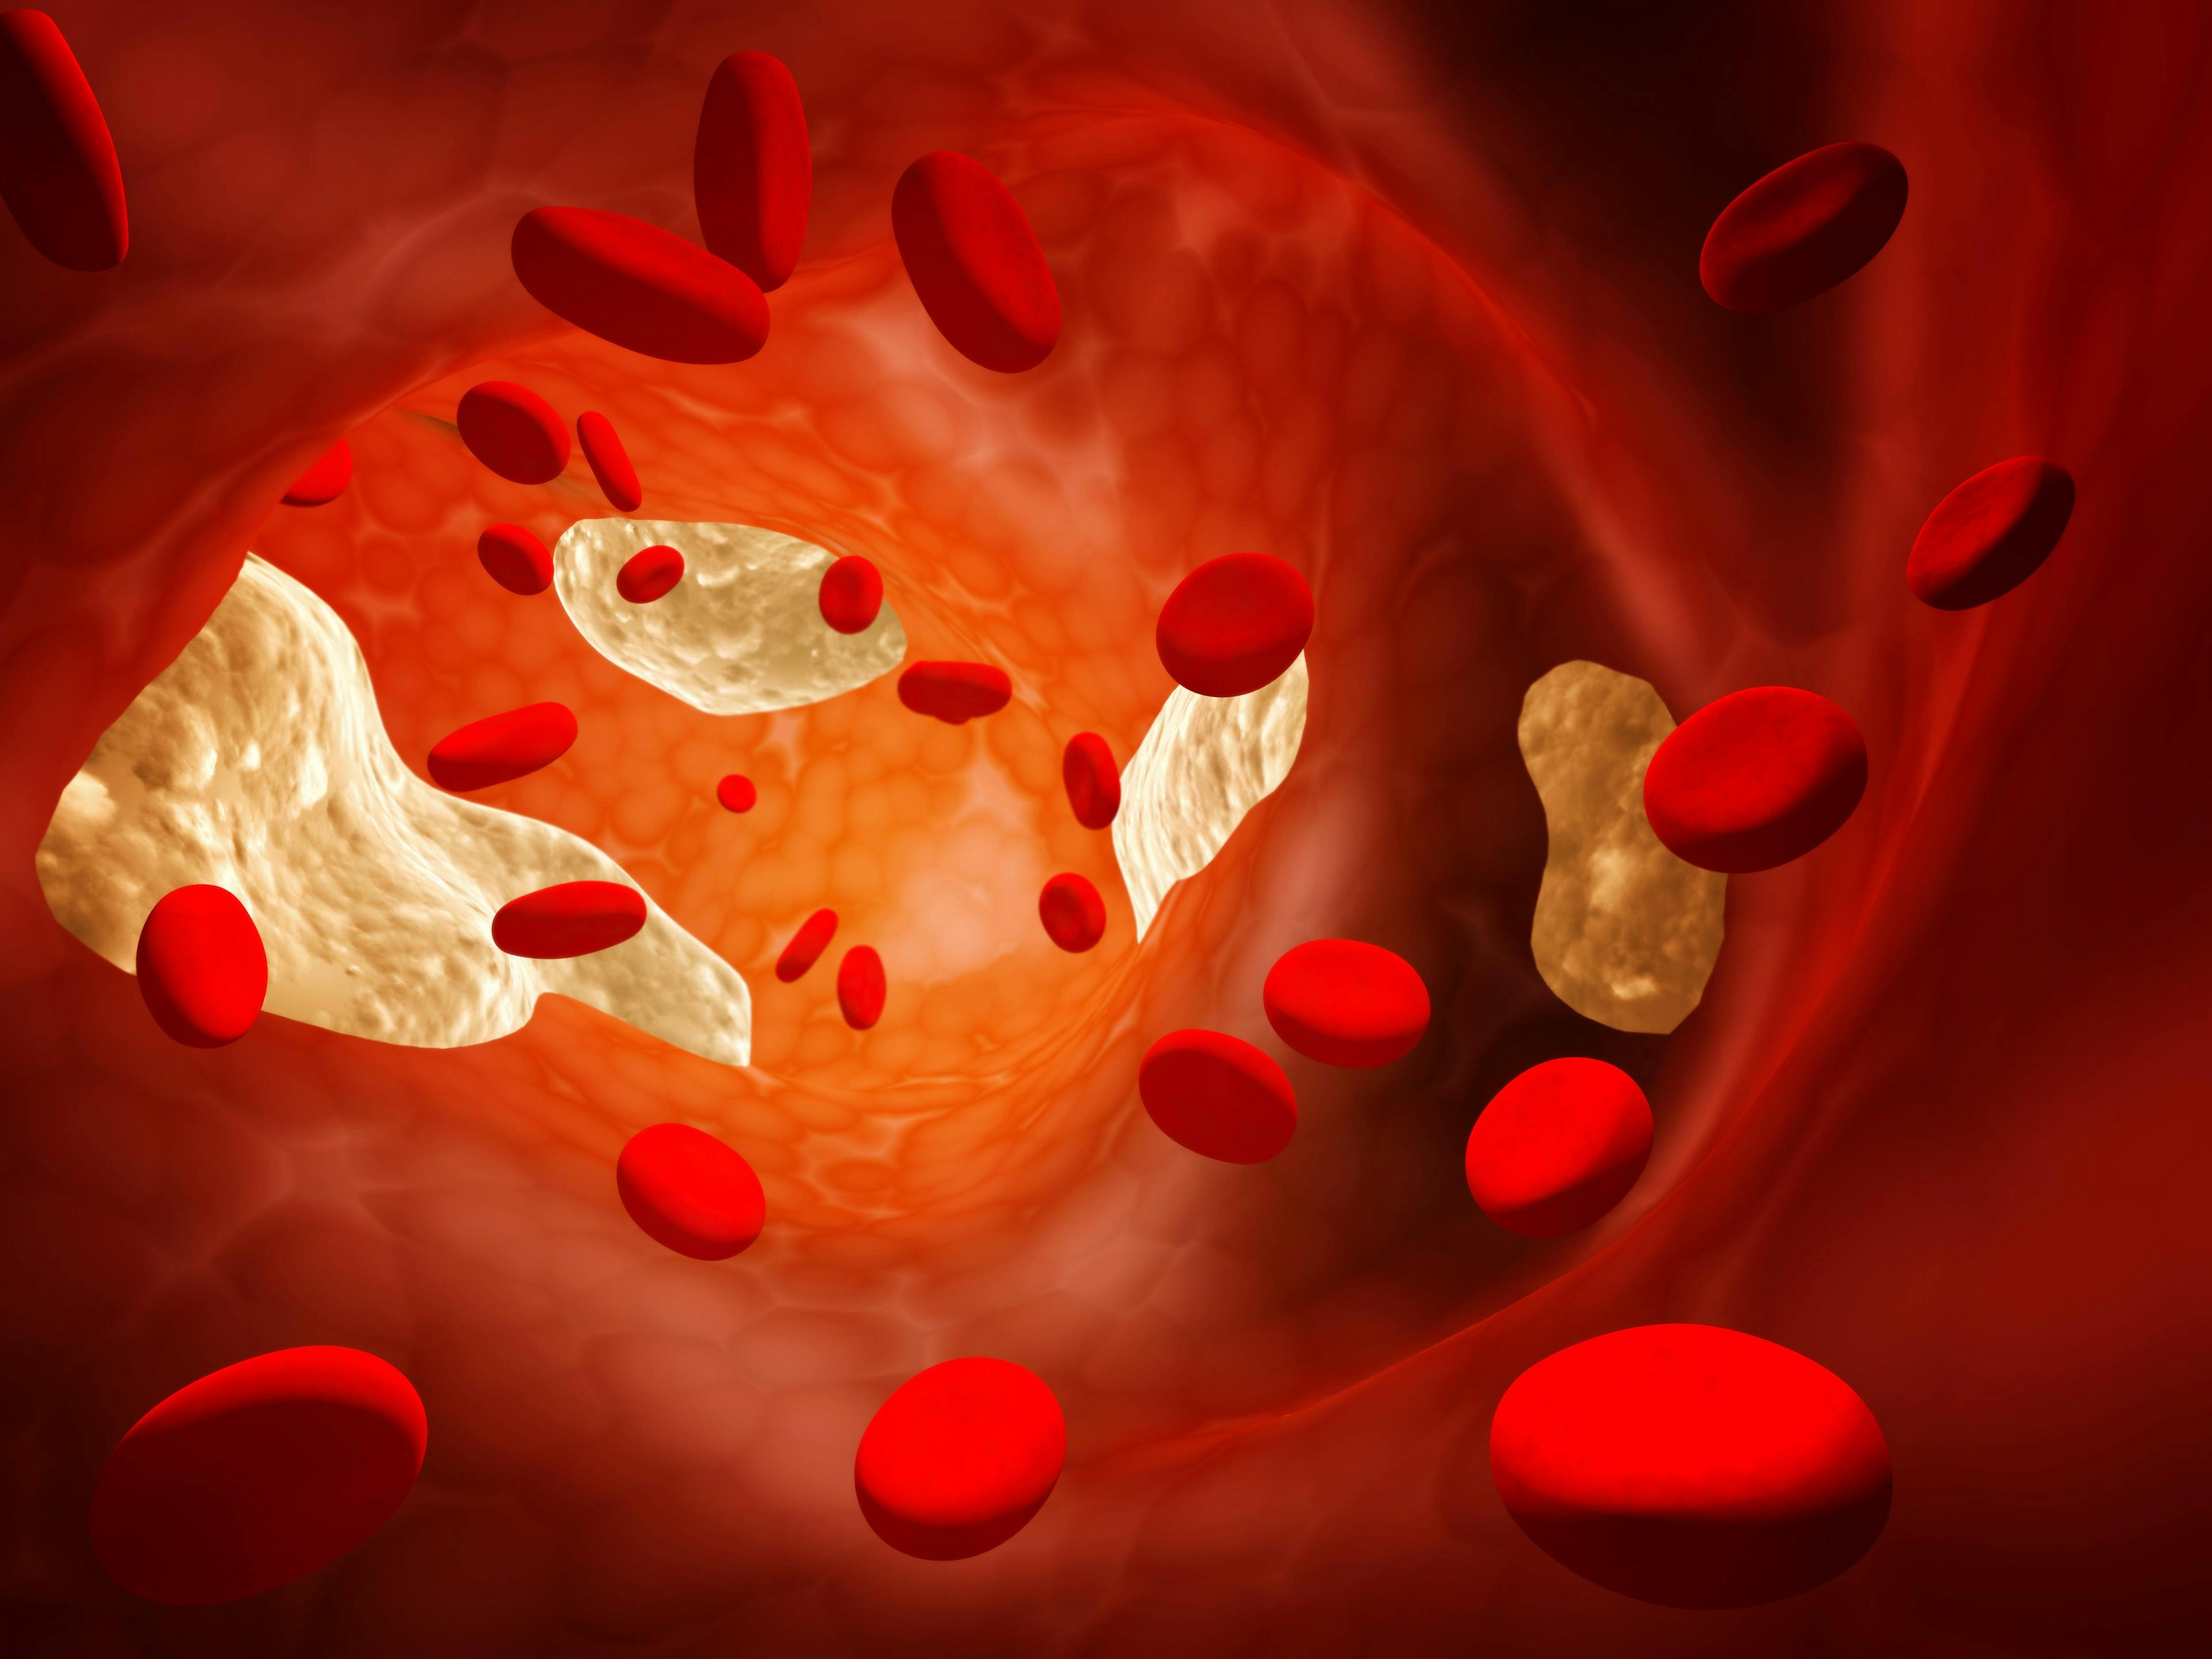 Digital illustration of red blood cells and cholesterol